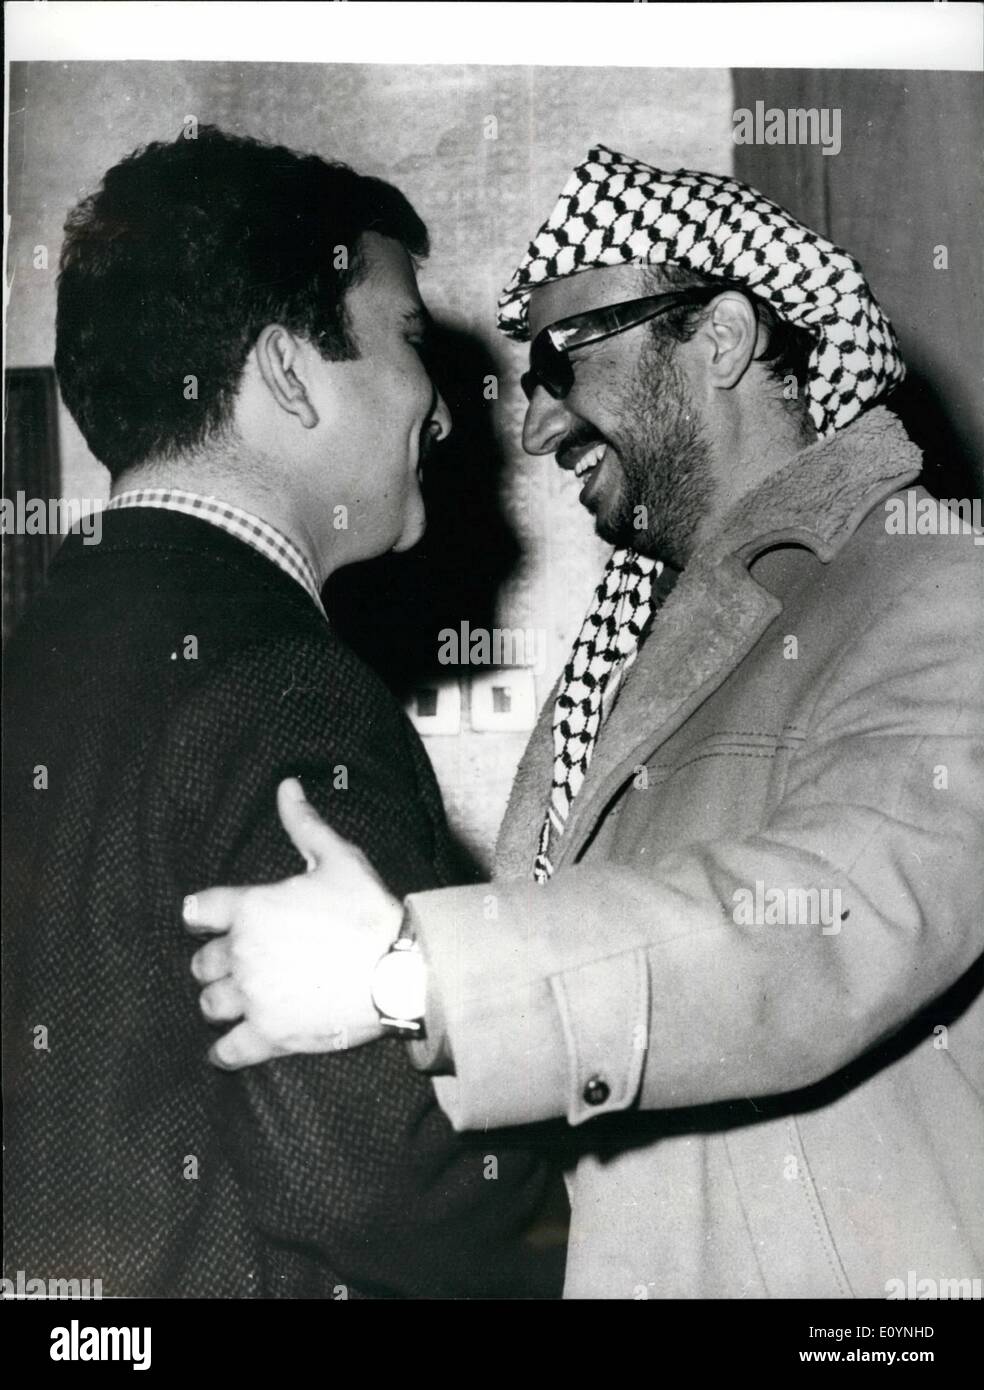 Dec. 12, 1970 - Agreement Reached: Photo shows Crown Prince Hassan of Jordan, is pictured on left, with Mr. Yaser Arafat, chairman of the central committee for the Palestine Liberation organisation, after reaching agreement in Amman recently on ending the latest clashes between the Jordan Army and Palestinian guerrillas. Stock Photo